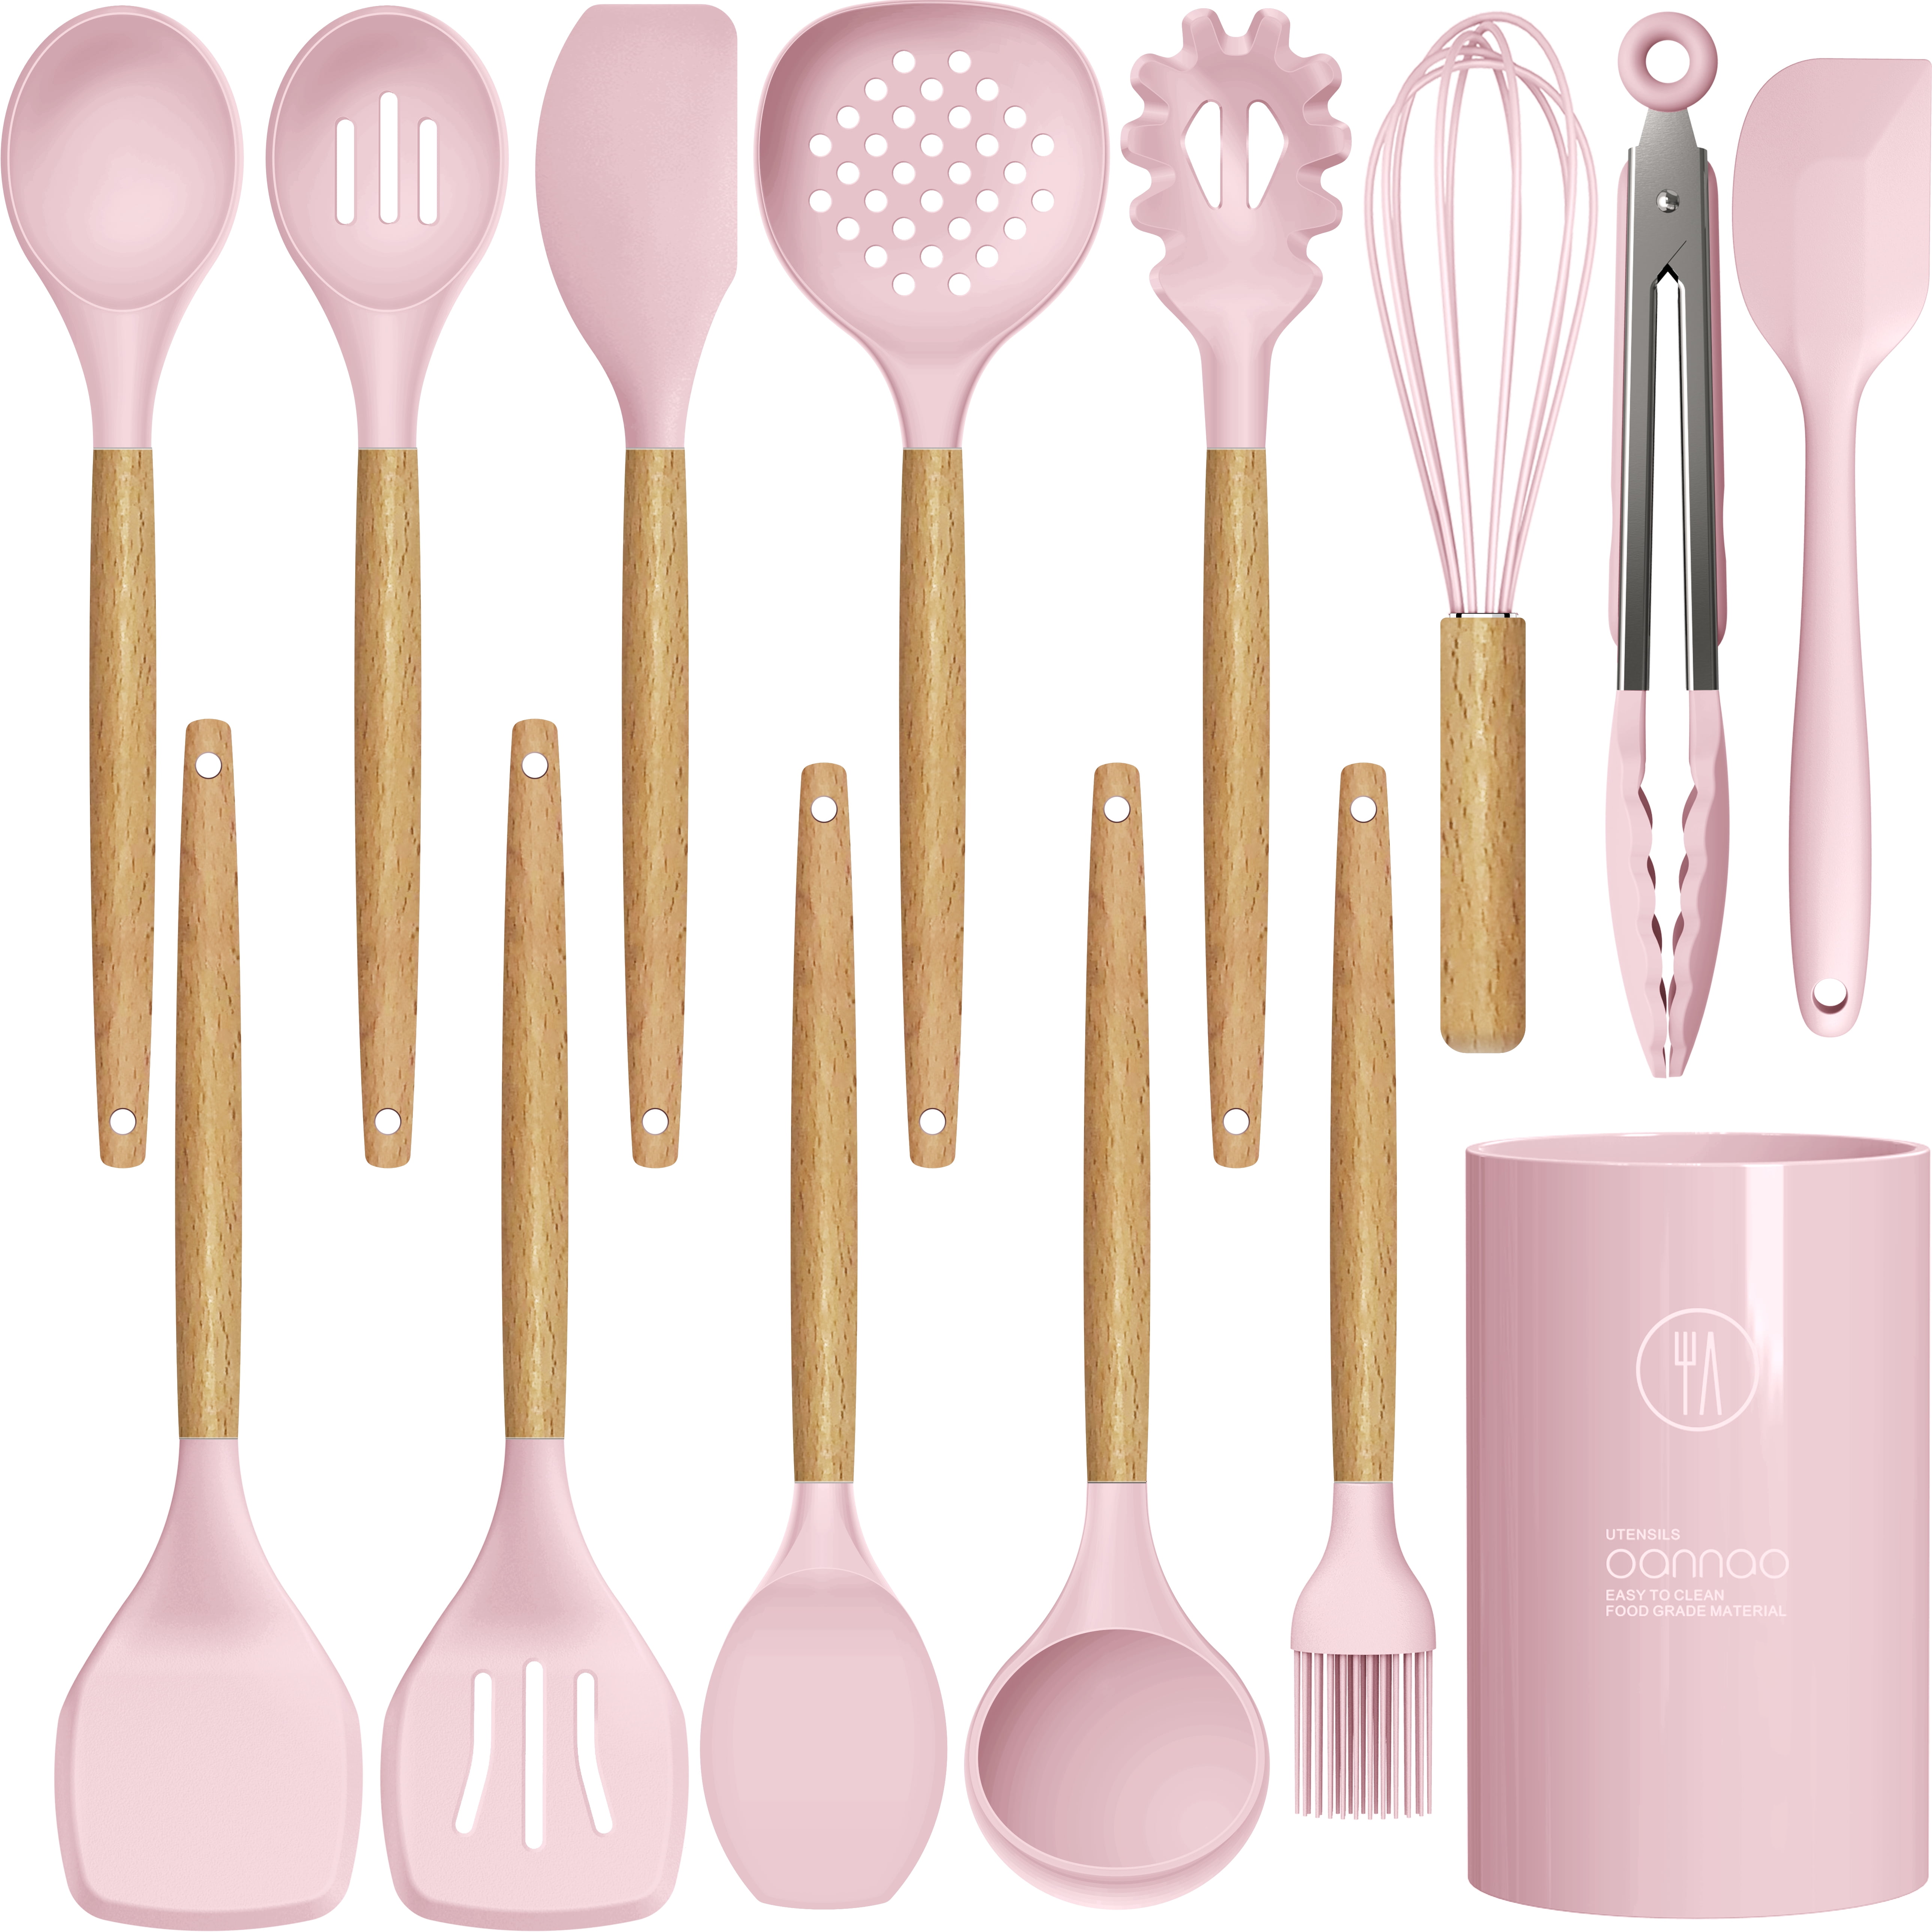 K & G Silicone Cooking Utensils Set 11 pcs Pink Kitchen Utensils Set with  Holder, Spatula, Whisk, To…See more K & G Silicone Cooking Utensils Set 11